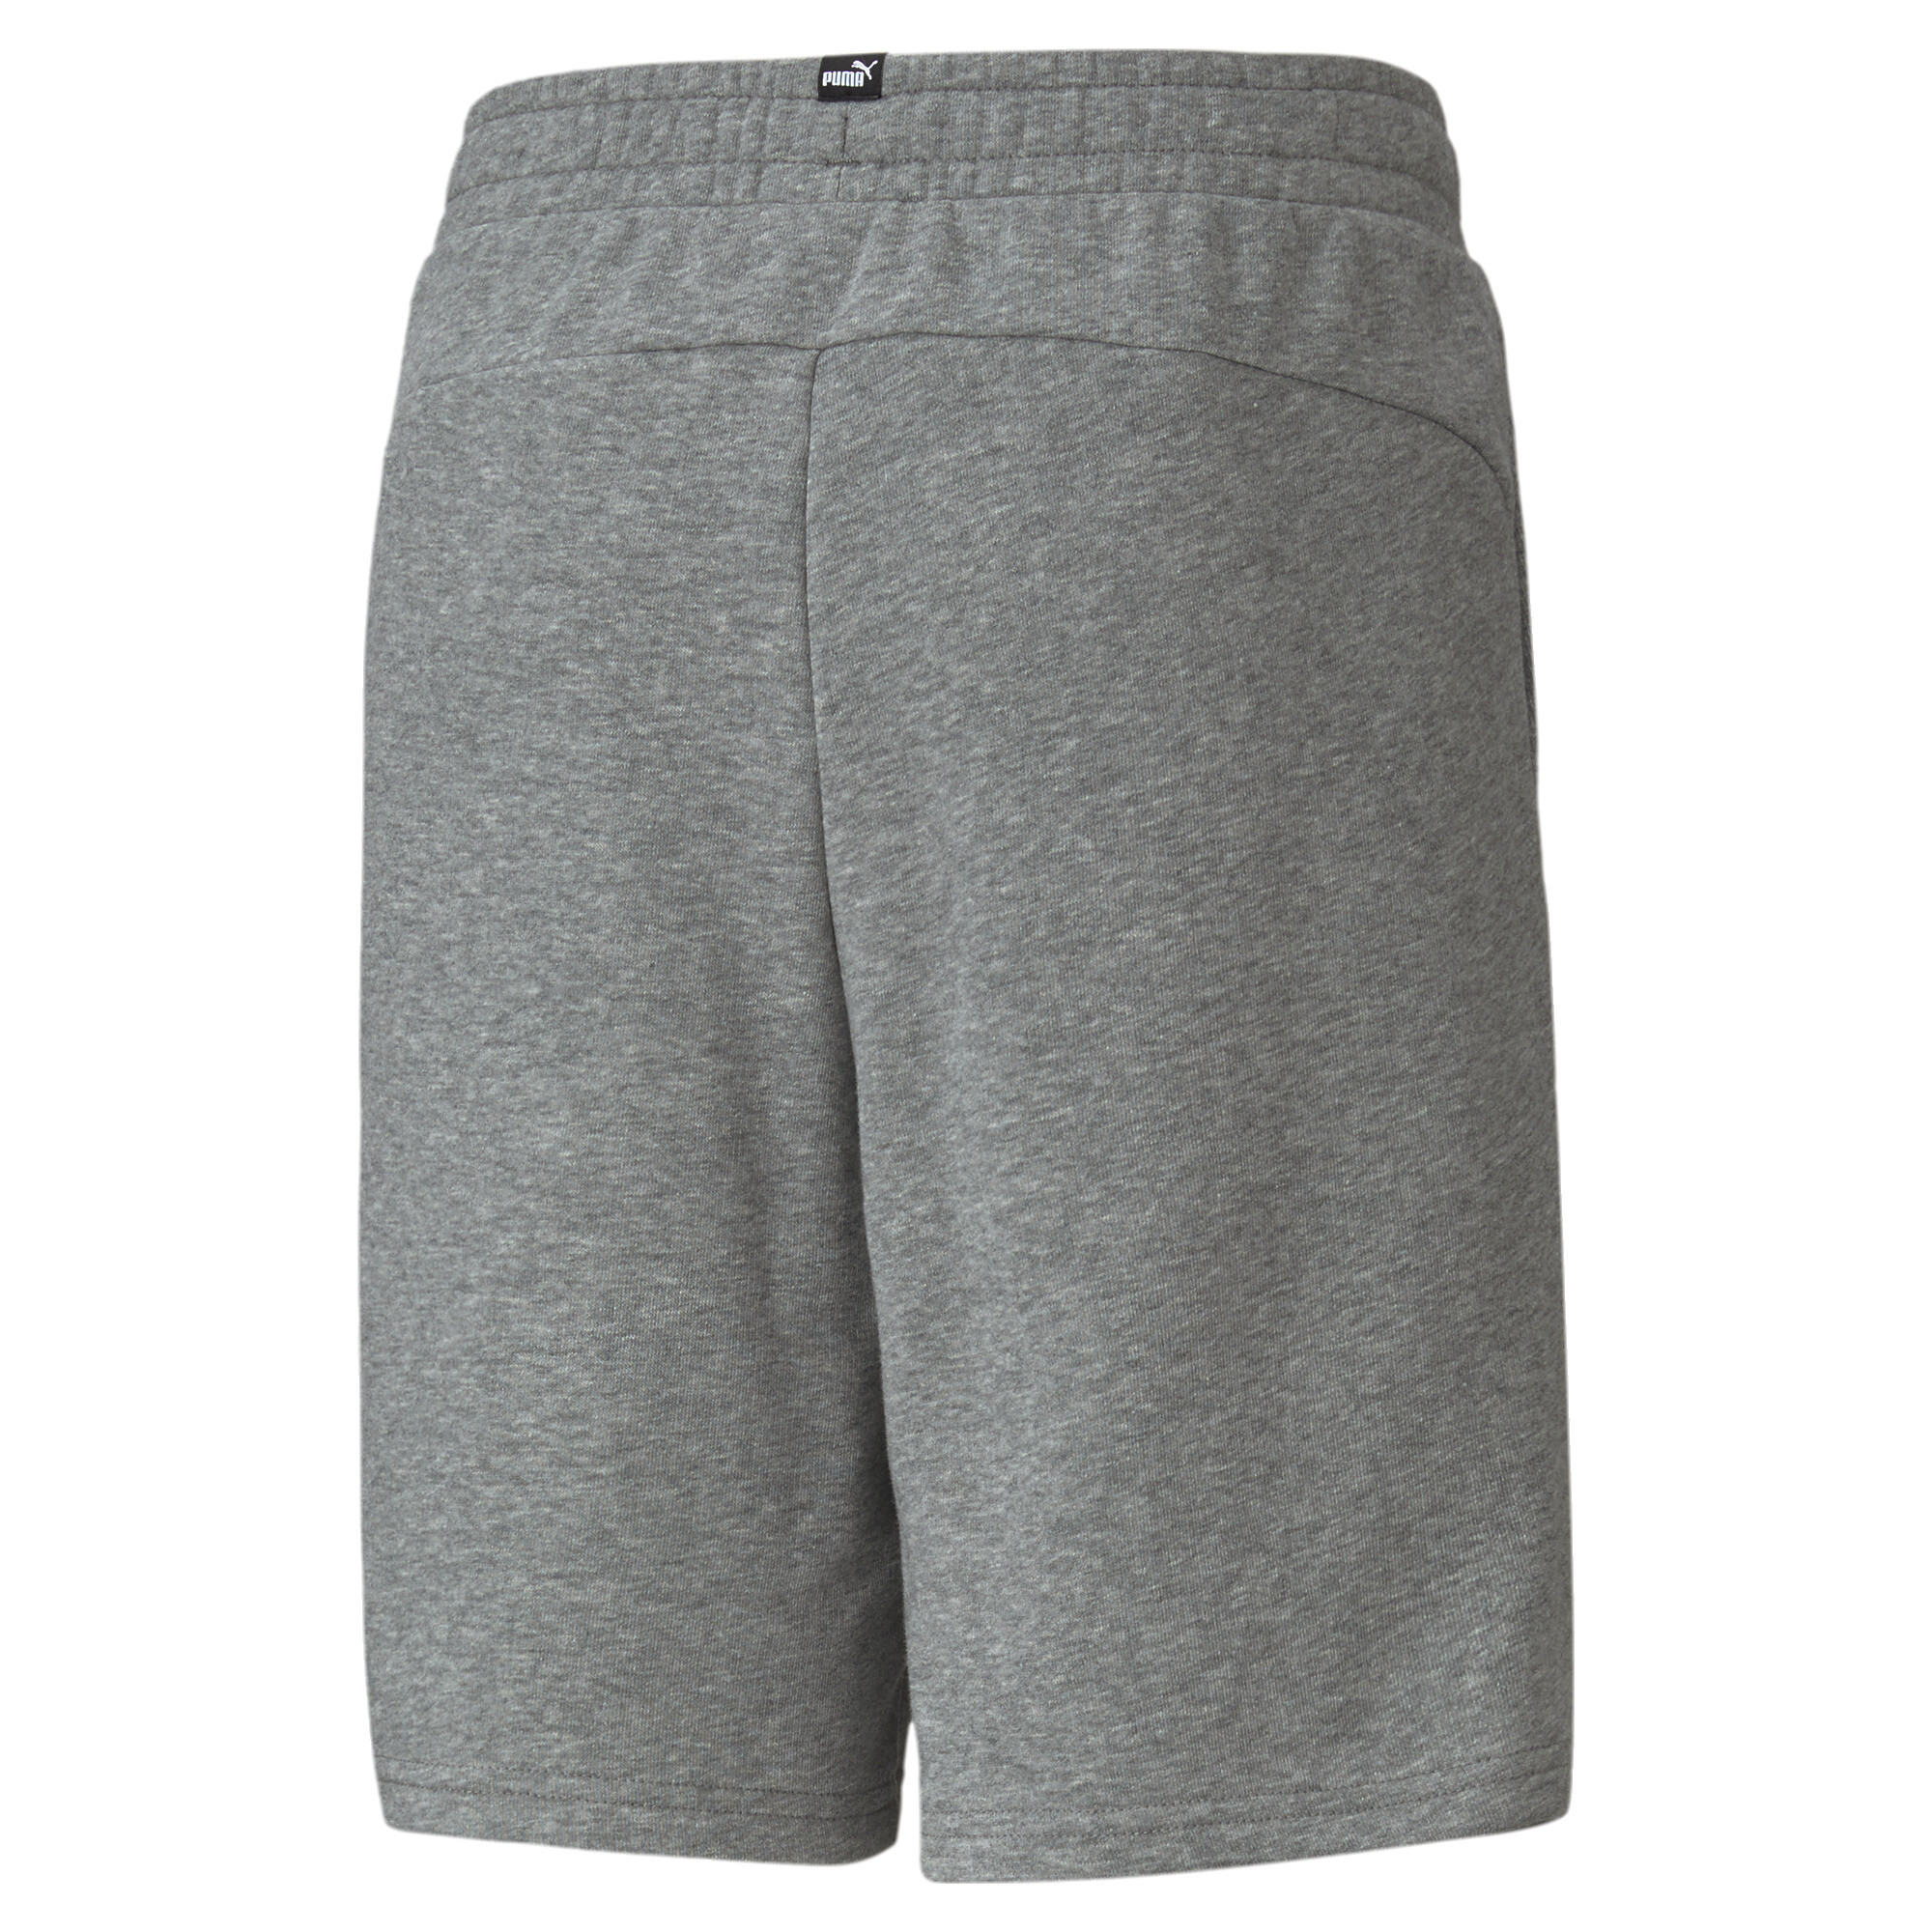 PUMA Essentials Sweat Shorts In Heather, Size 4-5 Youth